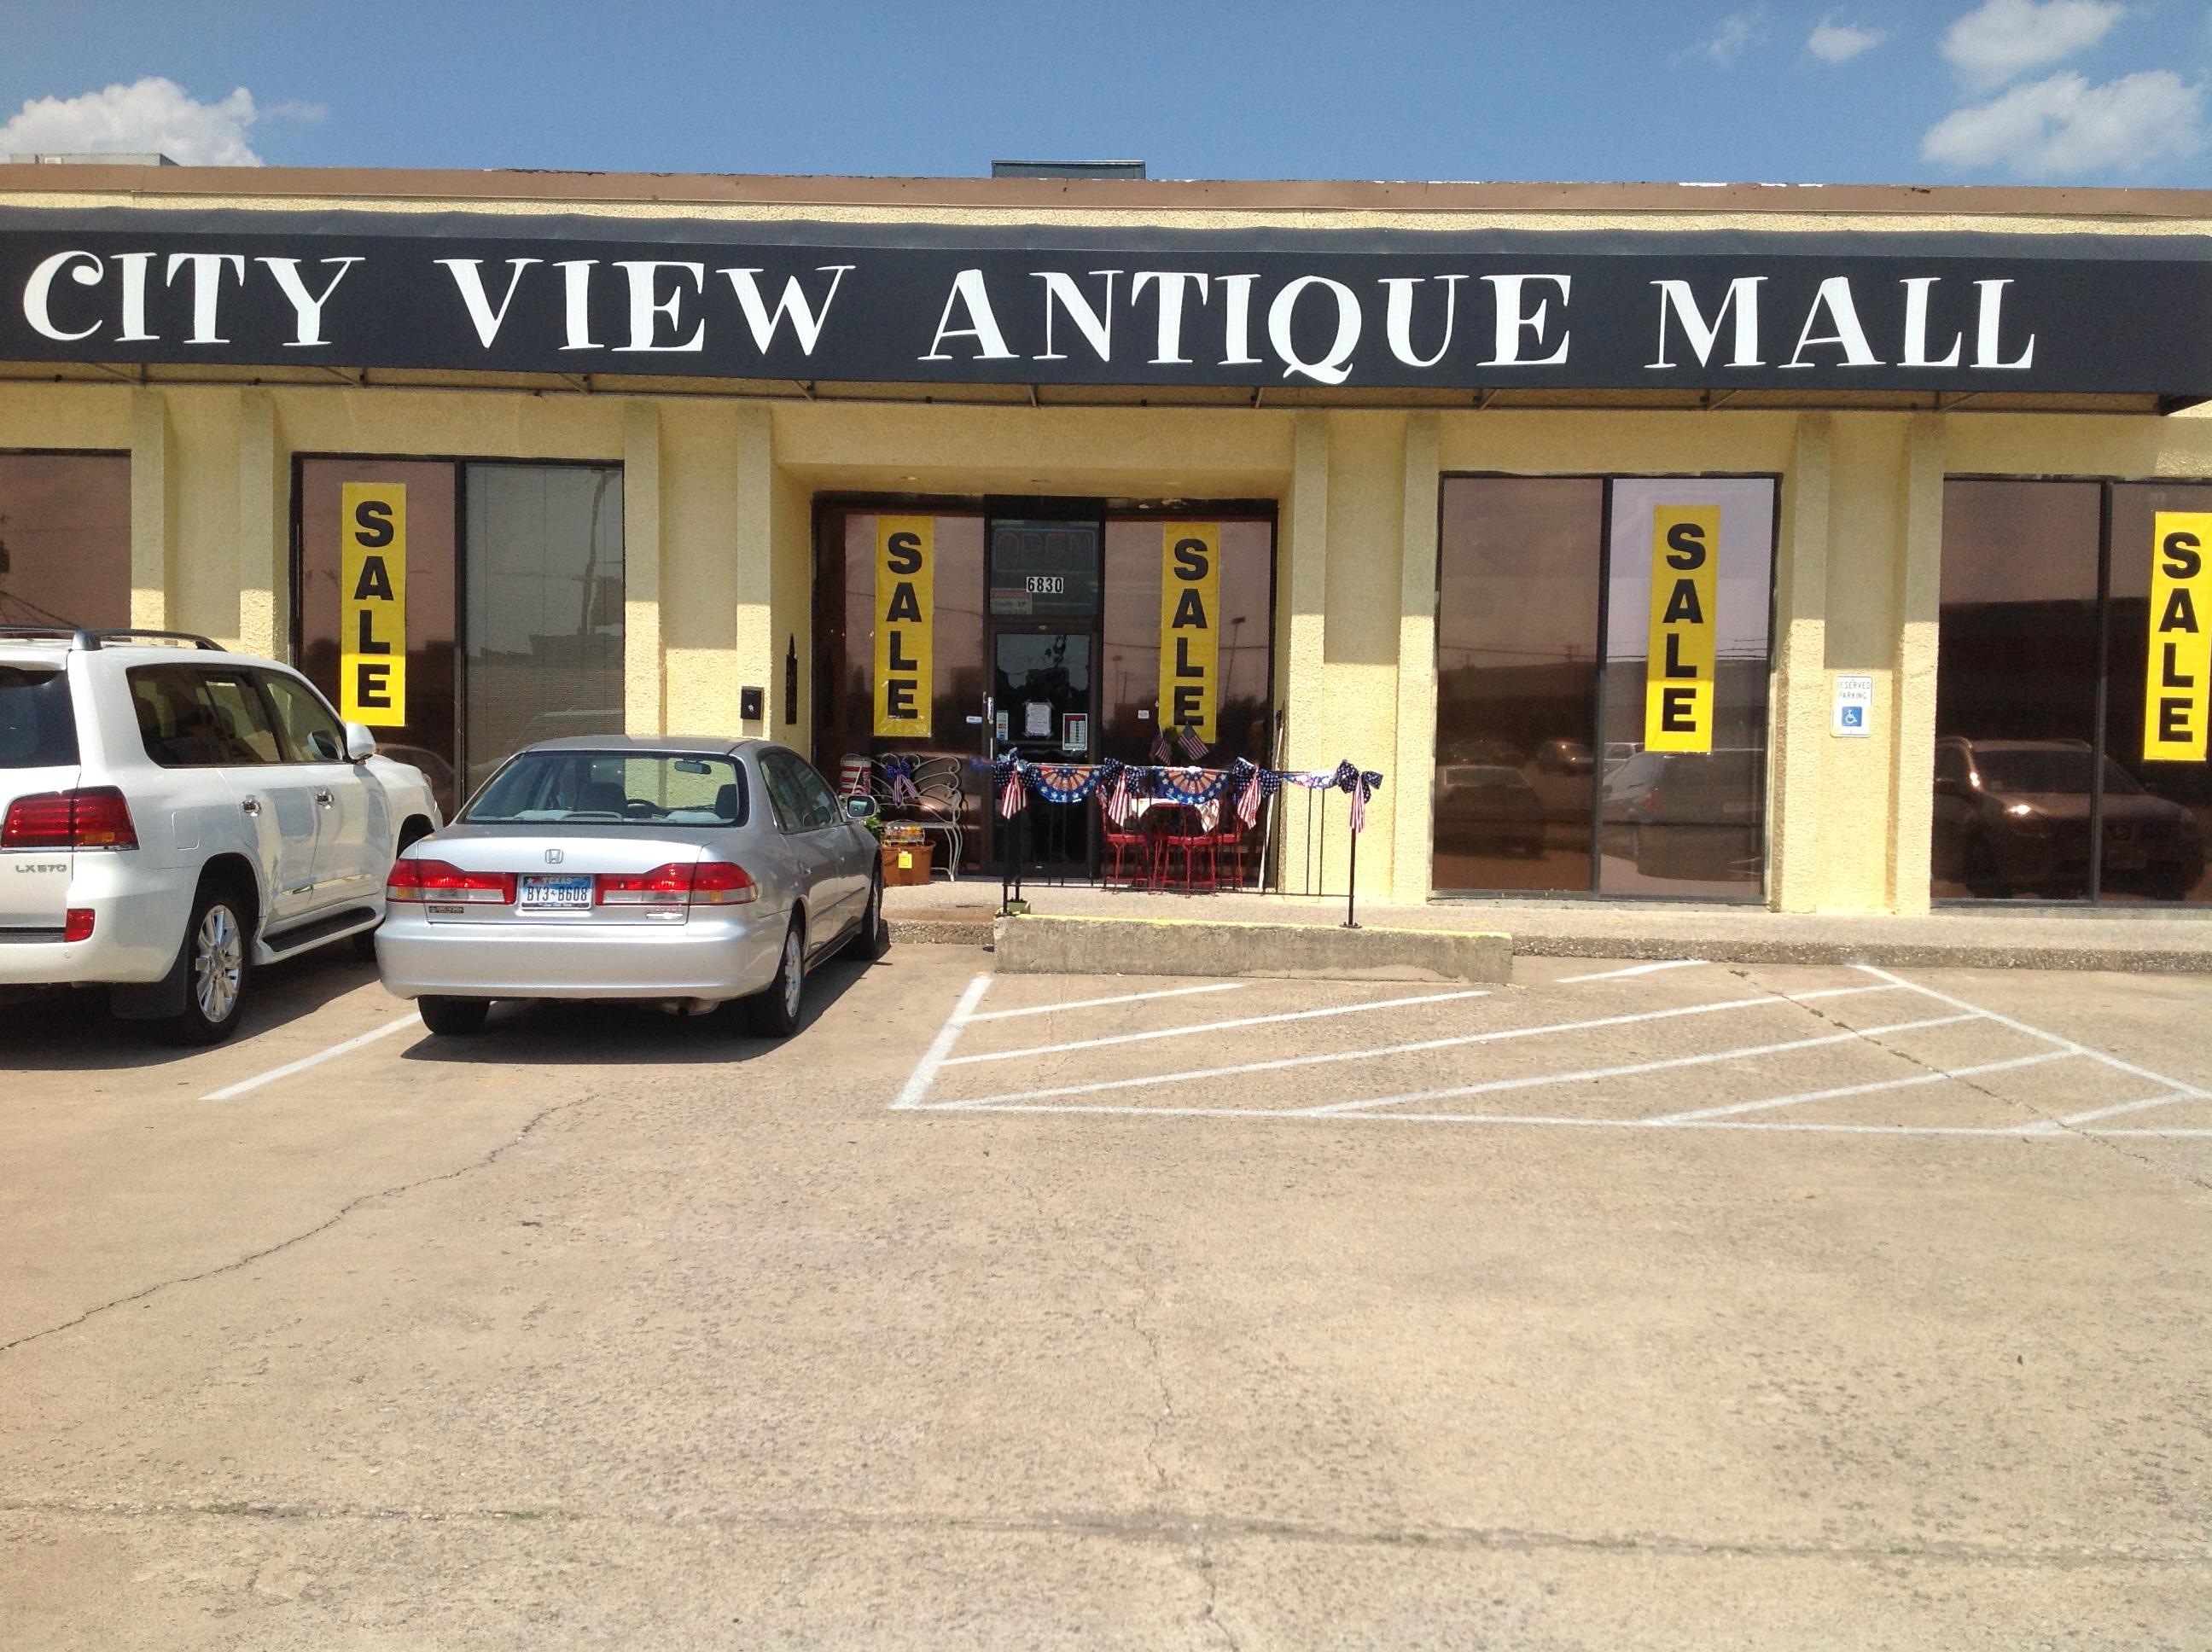 City View Antique Mall Coupons near me in Dallas | 8coupons